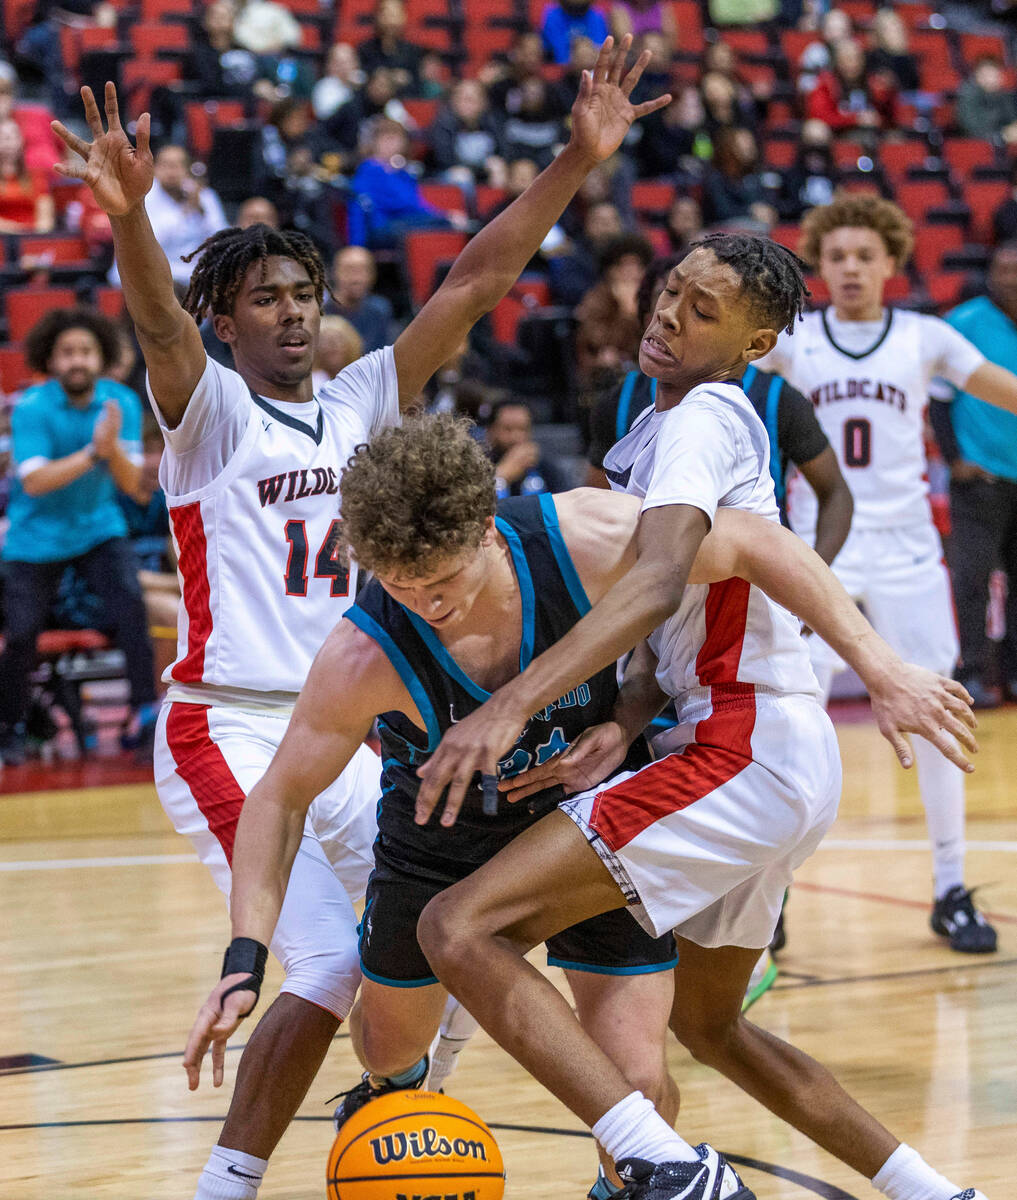 Silverado's Jake Wohl (32) is fouled while beating a double team of Las Vegas' Naseer Sims (1) ...